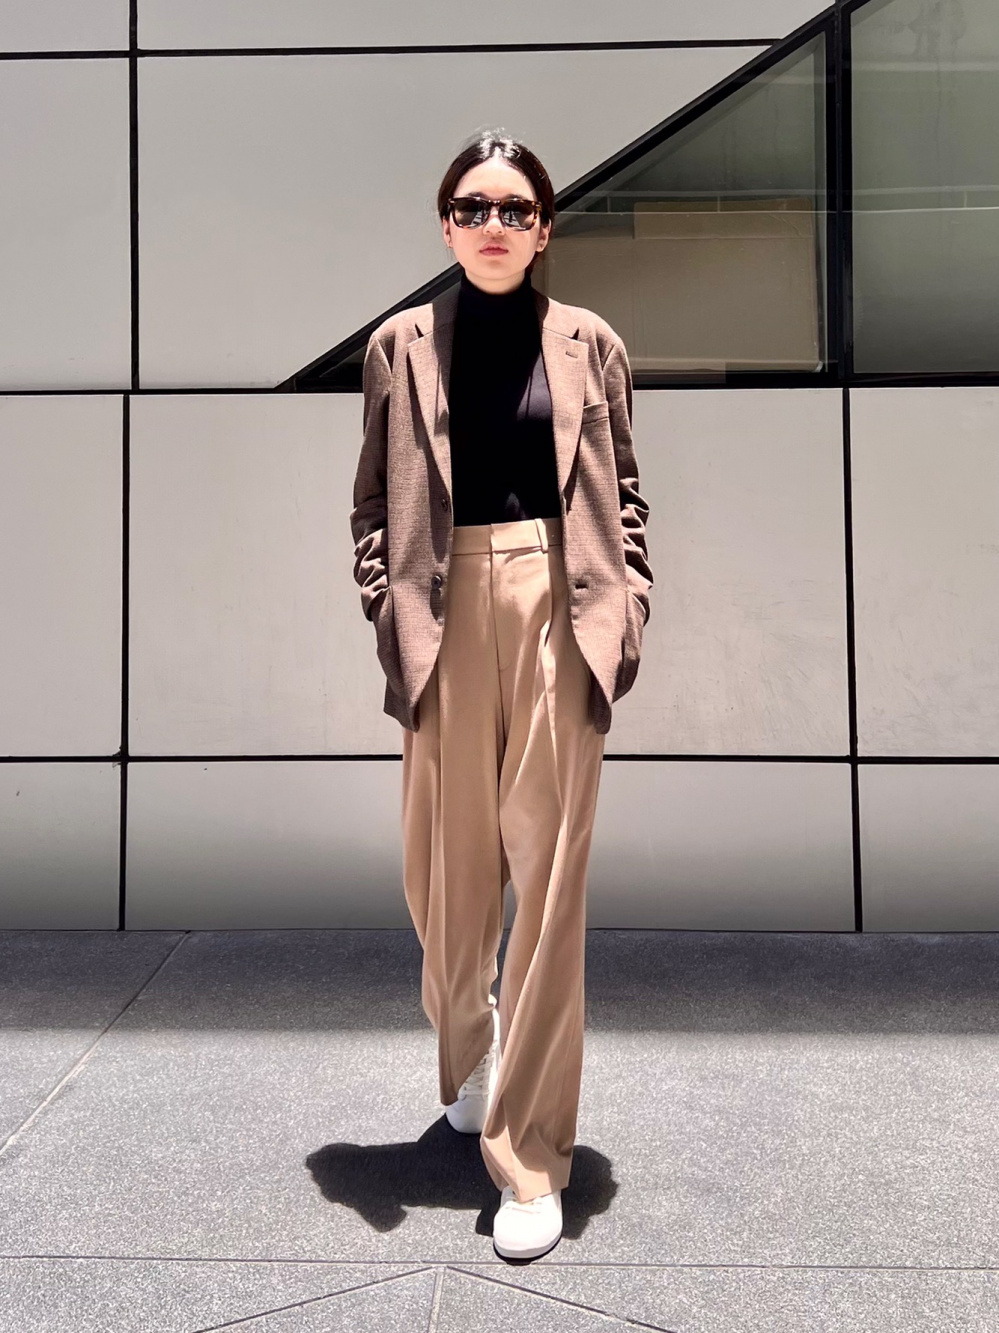 Check styling ideas for「PLEATED WIDE PANTS」